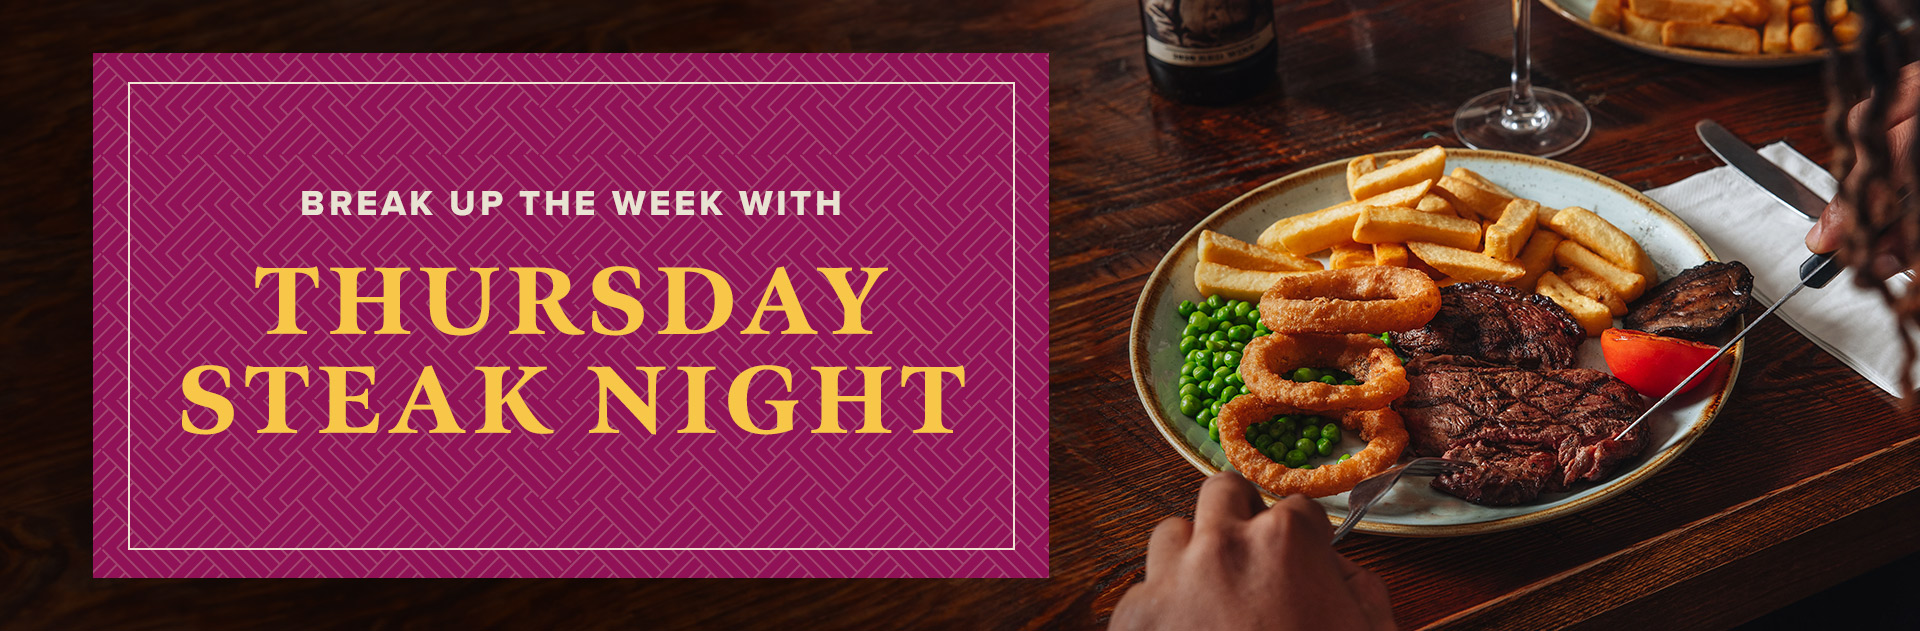 Thursday Steak Night at The Punch Bowl